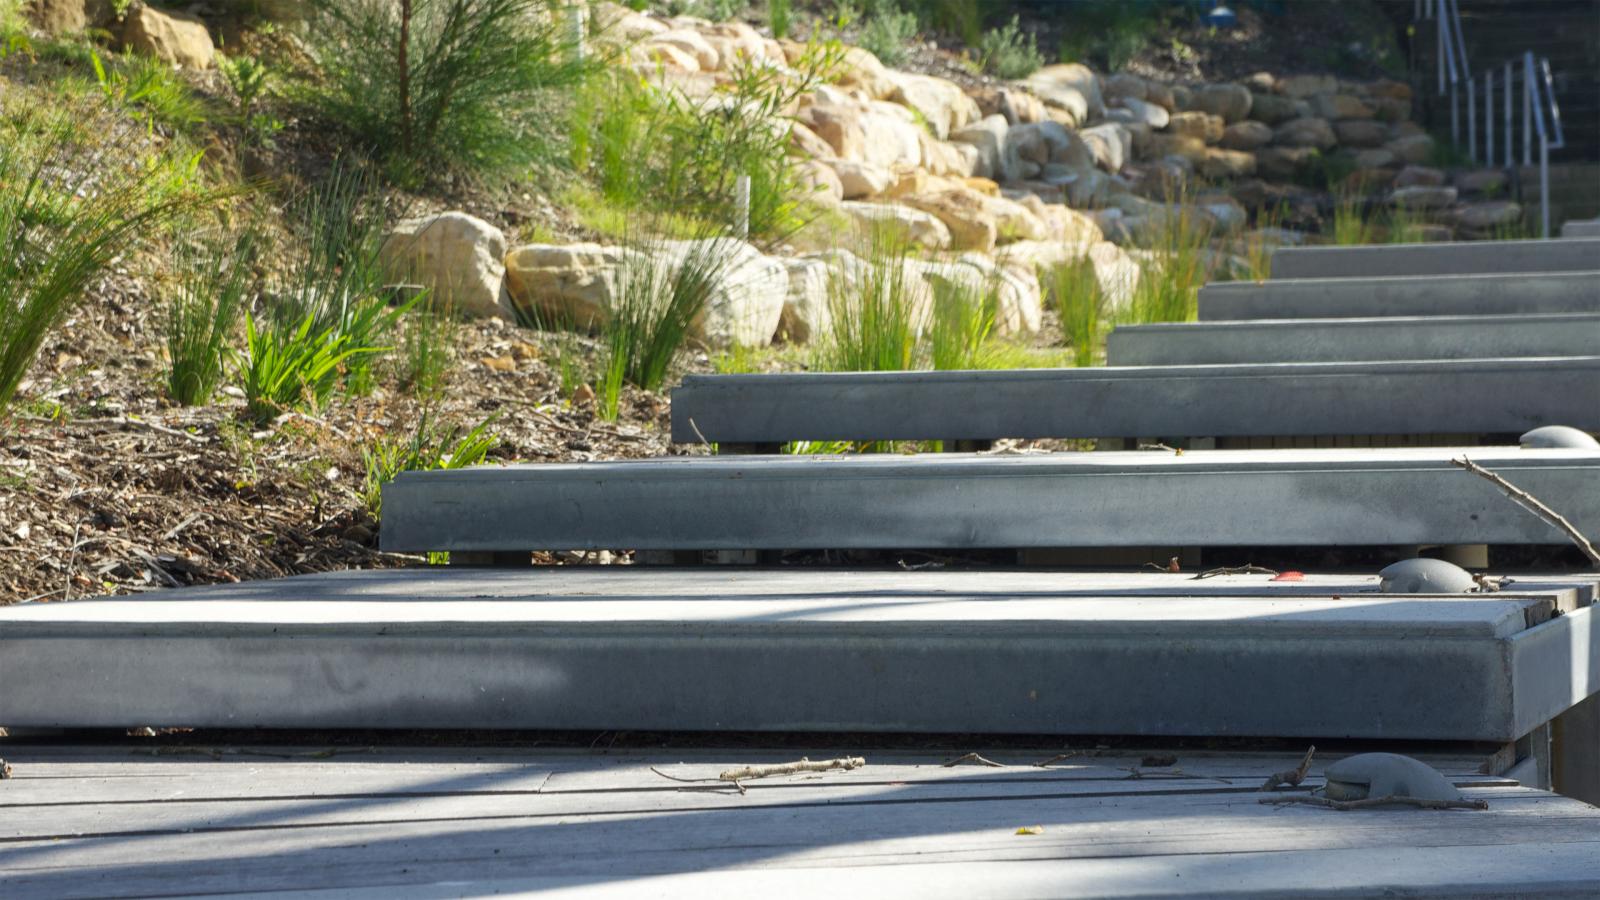 Image of a modern outdoor staircase with thick concrete steps surrounded by landscaped greenery, rocks, and plants. Sunlight casts shadows on the steps, highlighting the natural setting and design elements. The scene is calm and inviting, embracing the harmonious blend of nature and architecture in Manly's Spring Cove.